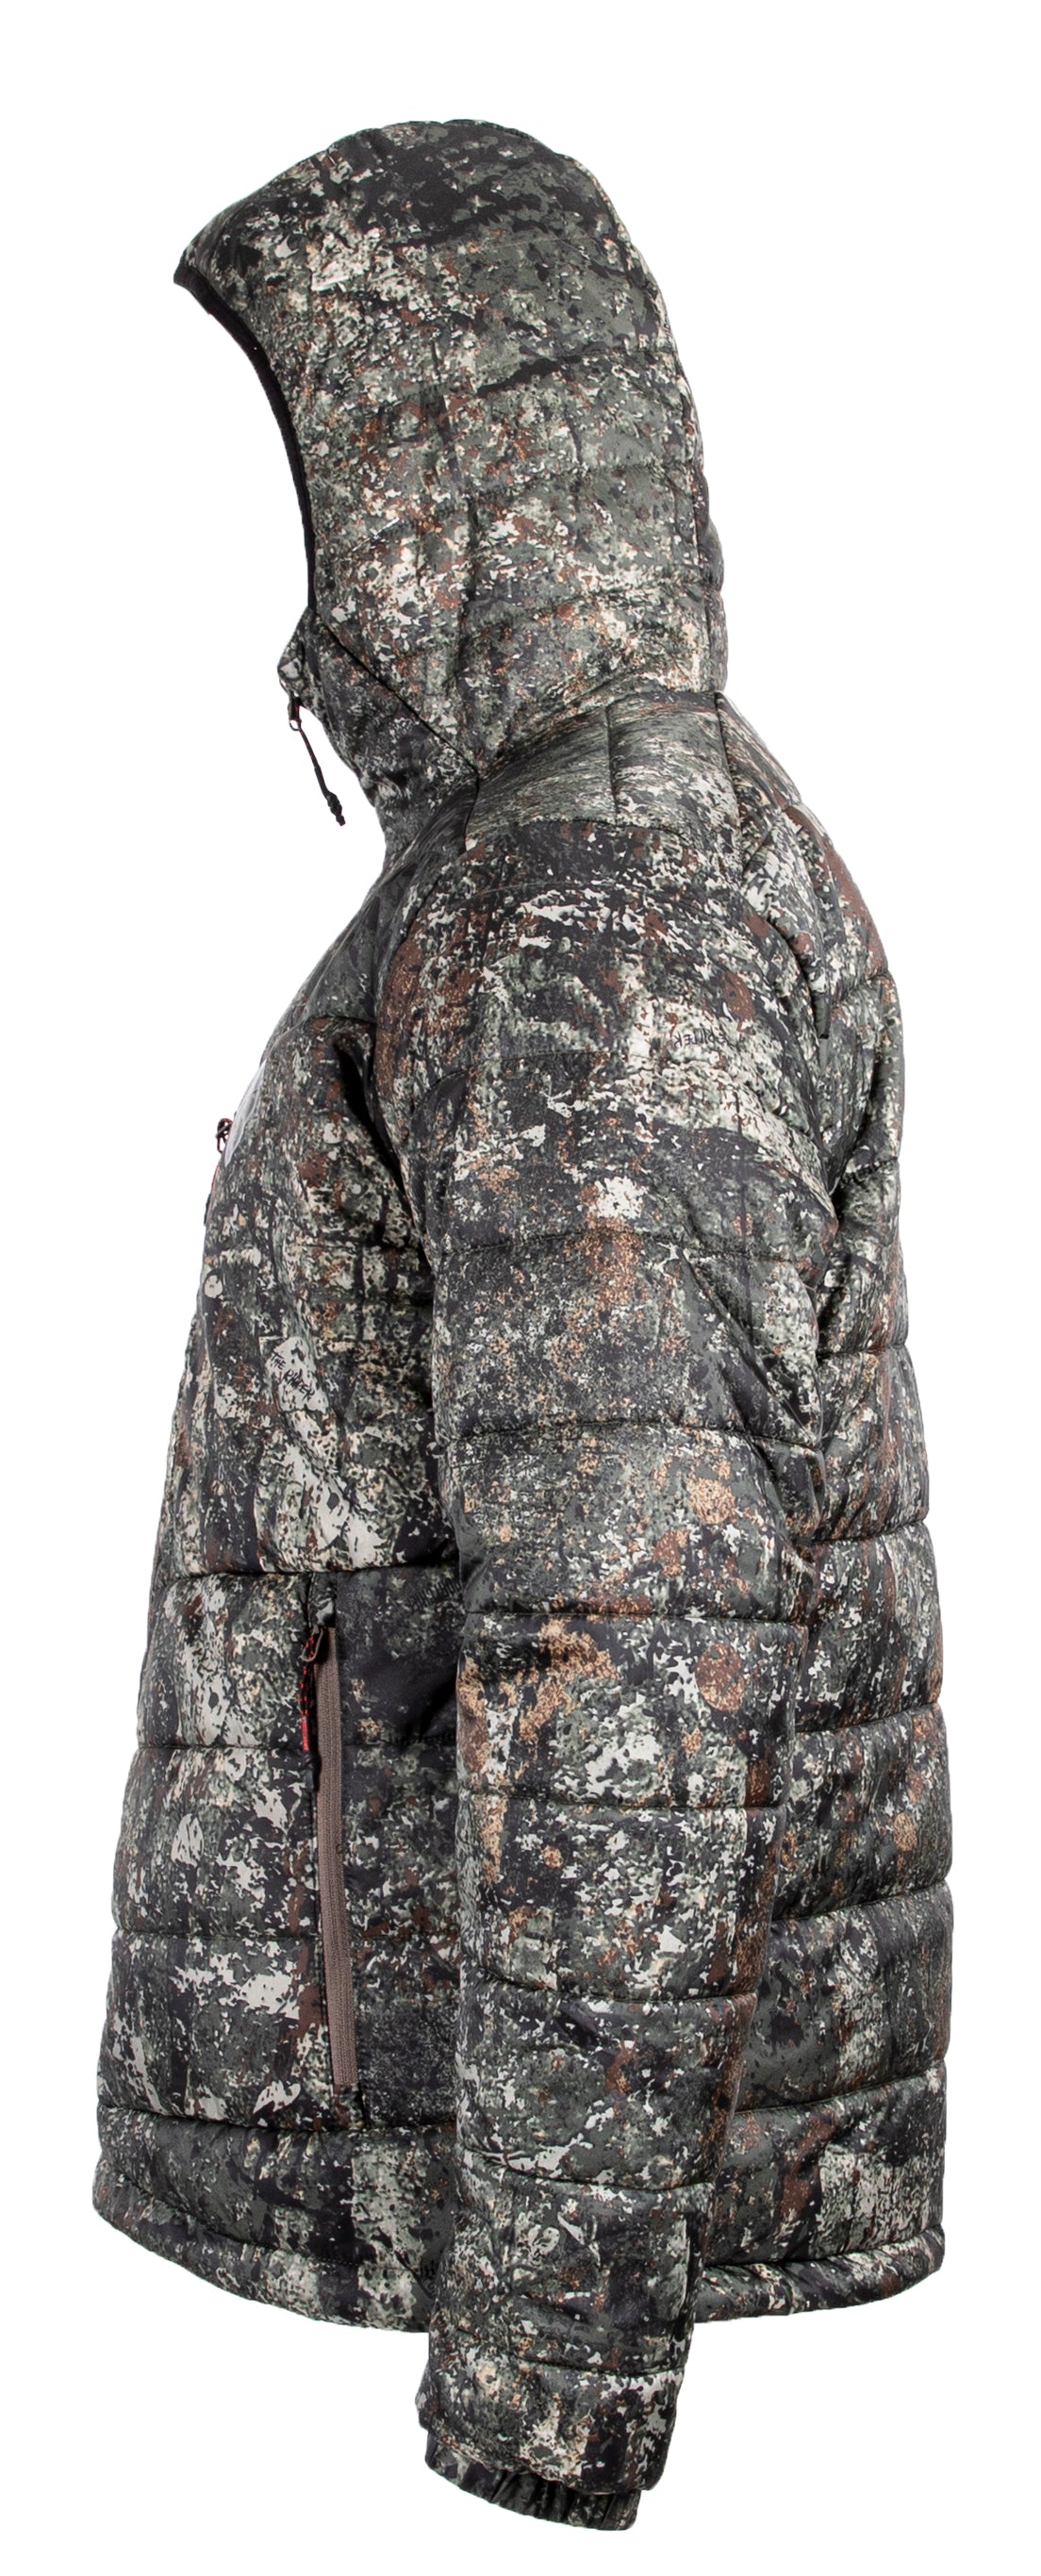 Sportchief "Wilson" camo The Ripper men's hunting jacket